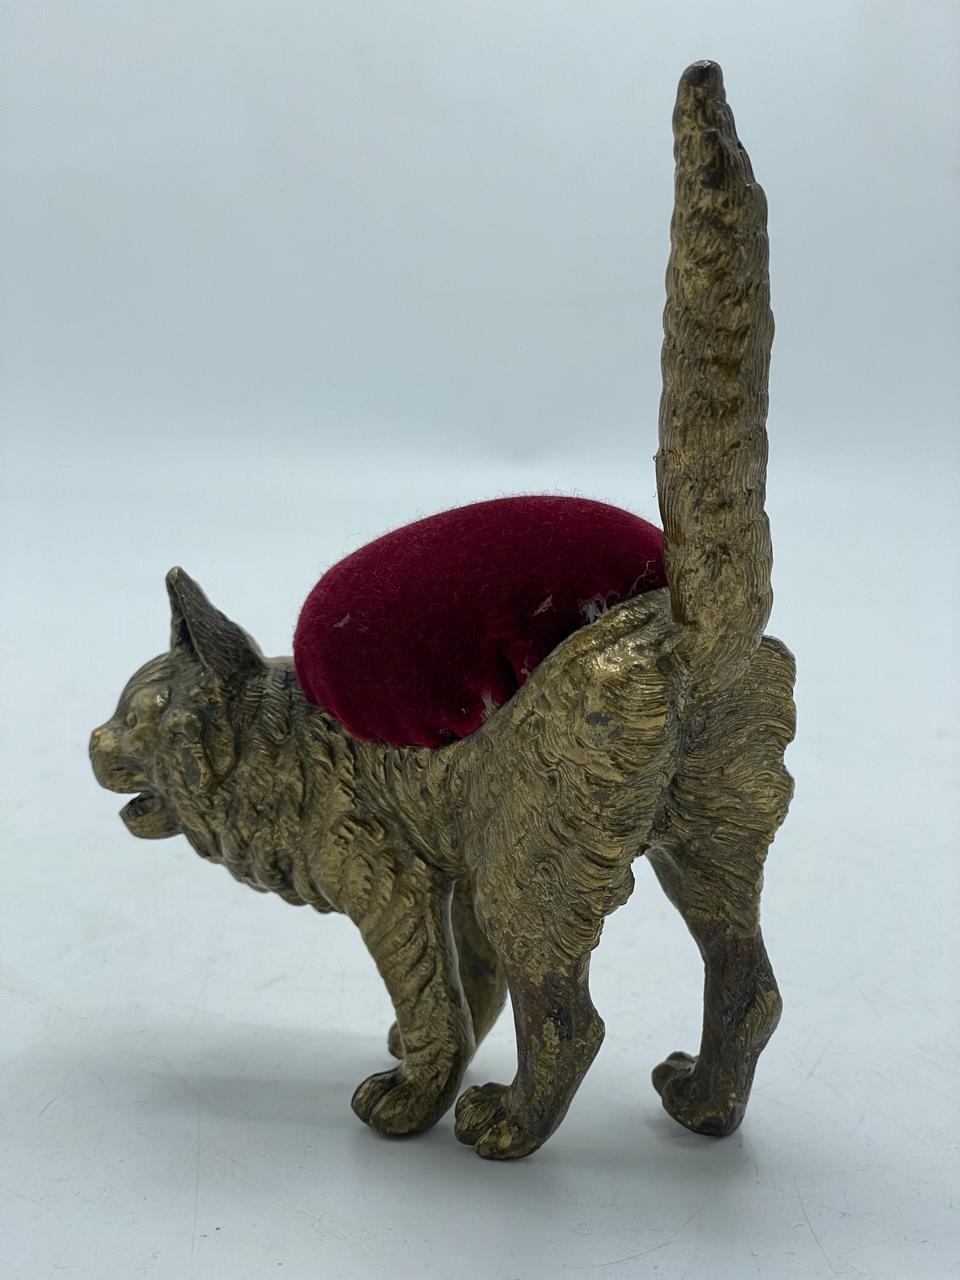                             20th Century Viennese bronze cat pincushion

           Pincushion showing a cat with bristly hair Viennese bronze with red 
     velvet, figure of the Early 20th century, perfect for collectors of Viennese 
             